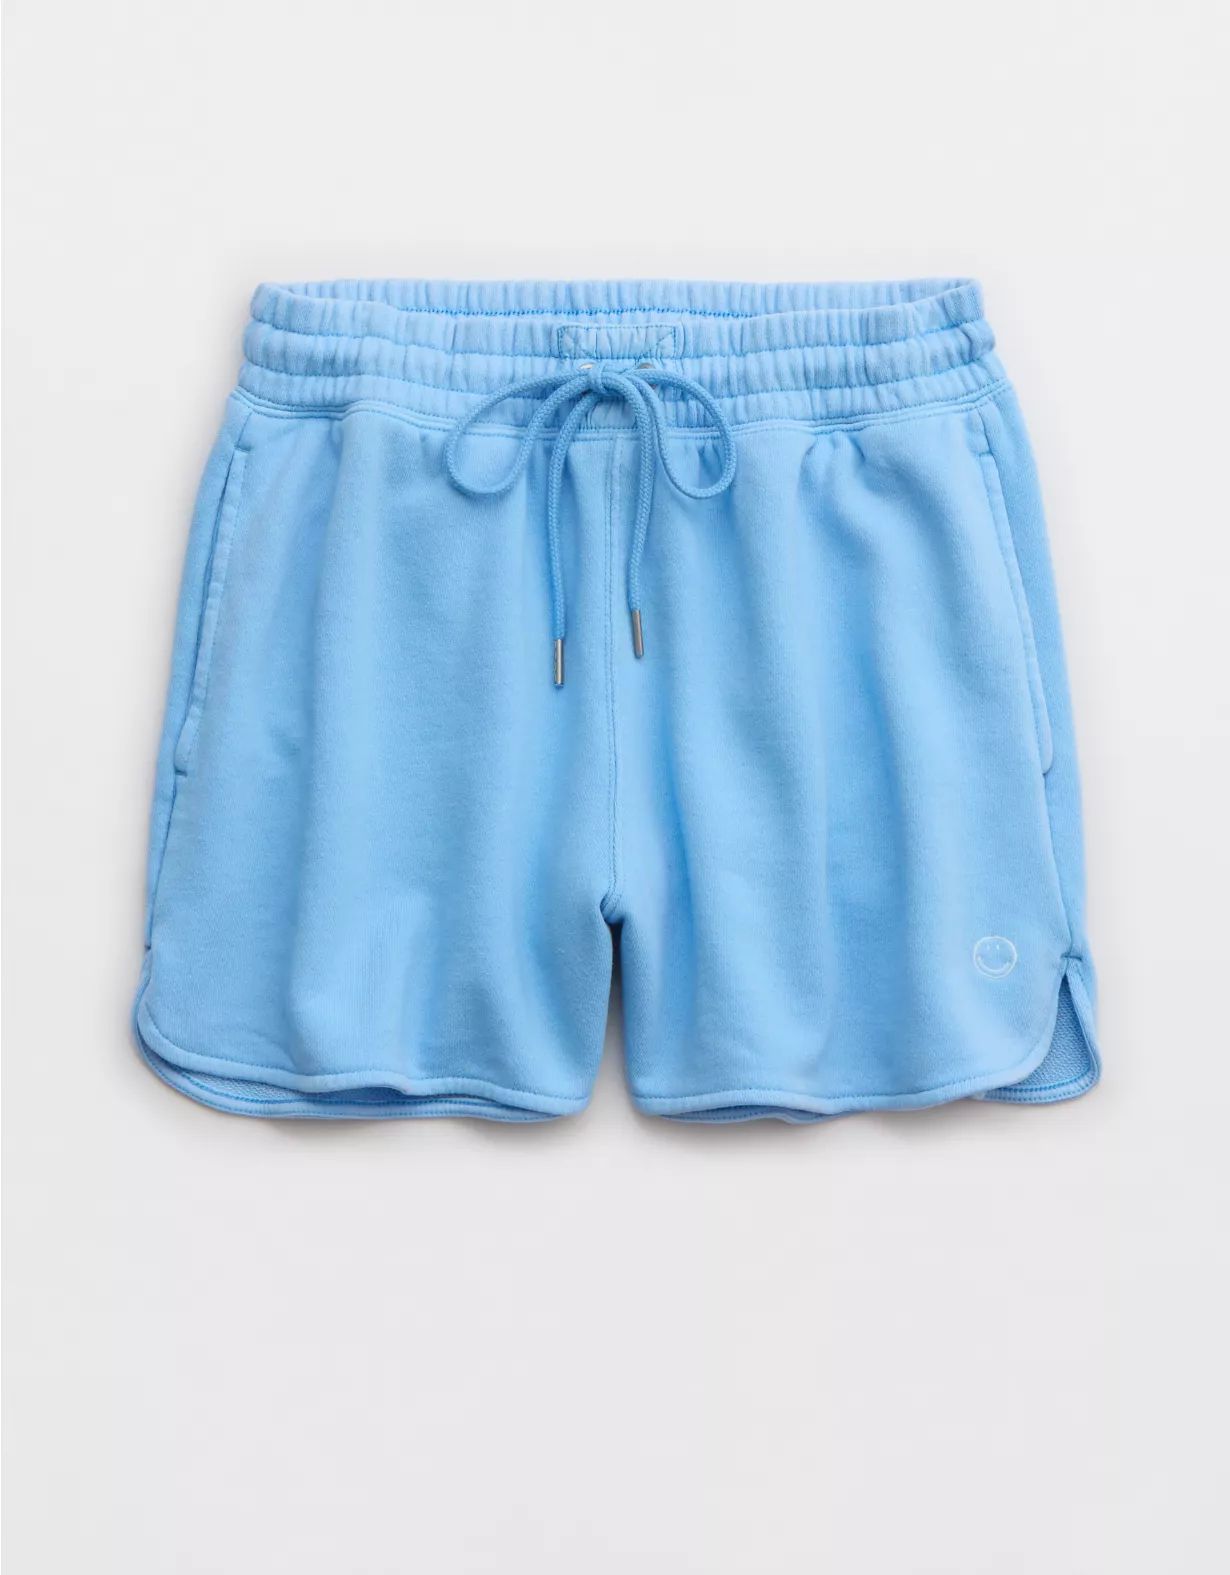 Aerie High Waisted REAL Short | Aerie